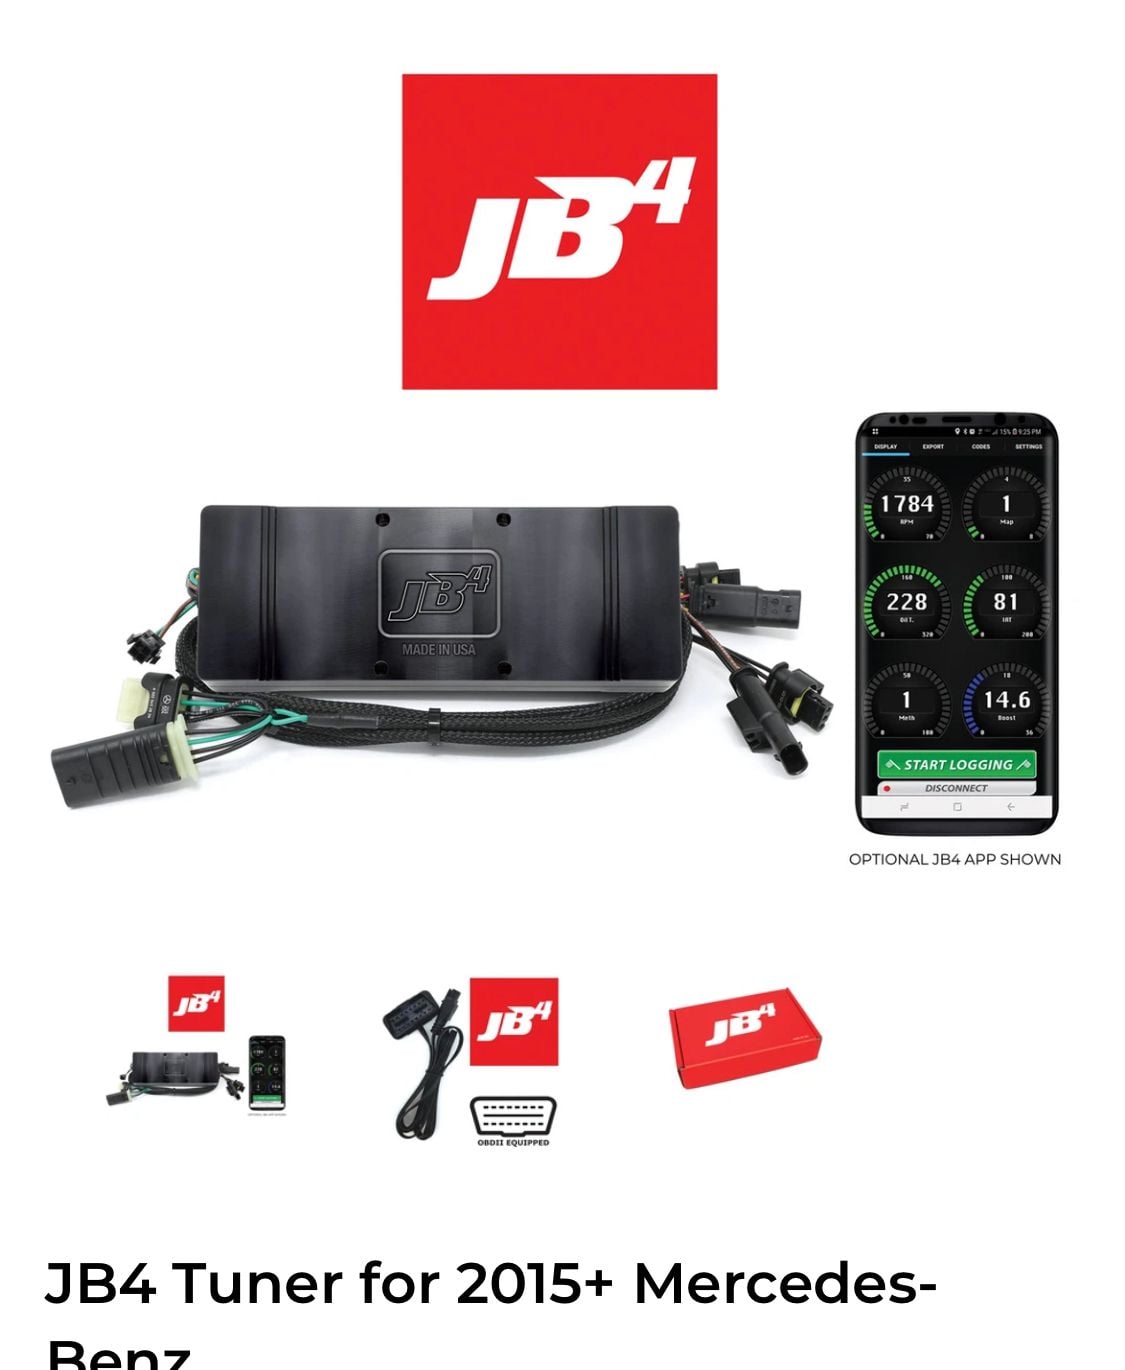 Engine - Power Adders - JB4 tuner w/ Bluetooth connection and a BMS dual intake - Used - 2015 to 2020 Mercedes-Benz C43 AMG - 2015 to 2020 Mercedes-Benz C400 - 2015 to 2020 Mercedes-Benz C450 AMG - Boca Raton, FL 33486, United States